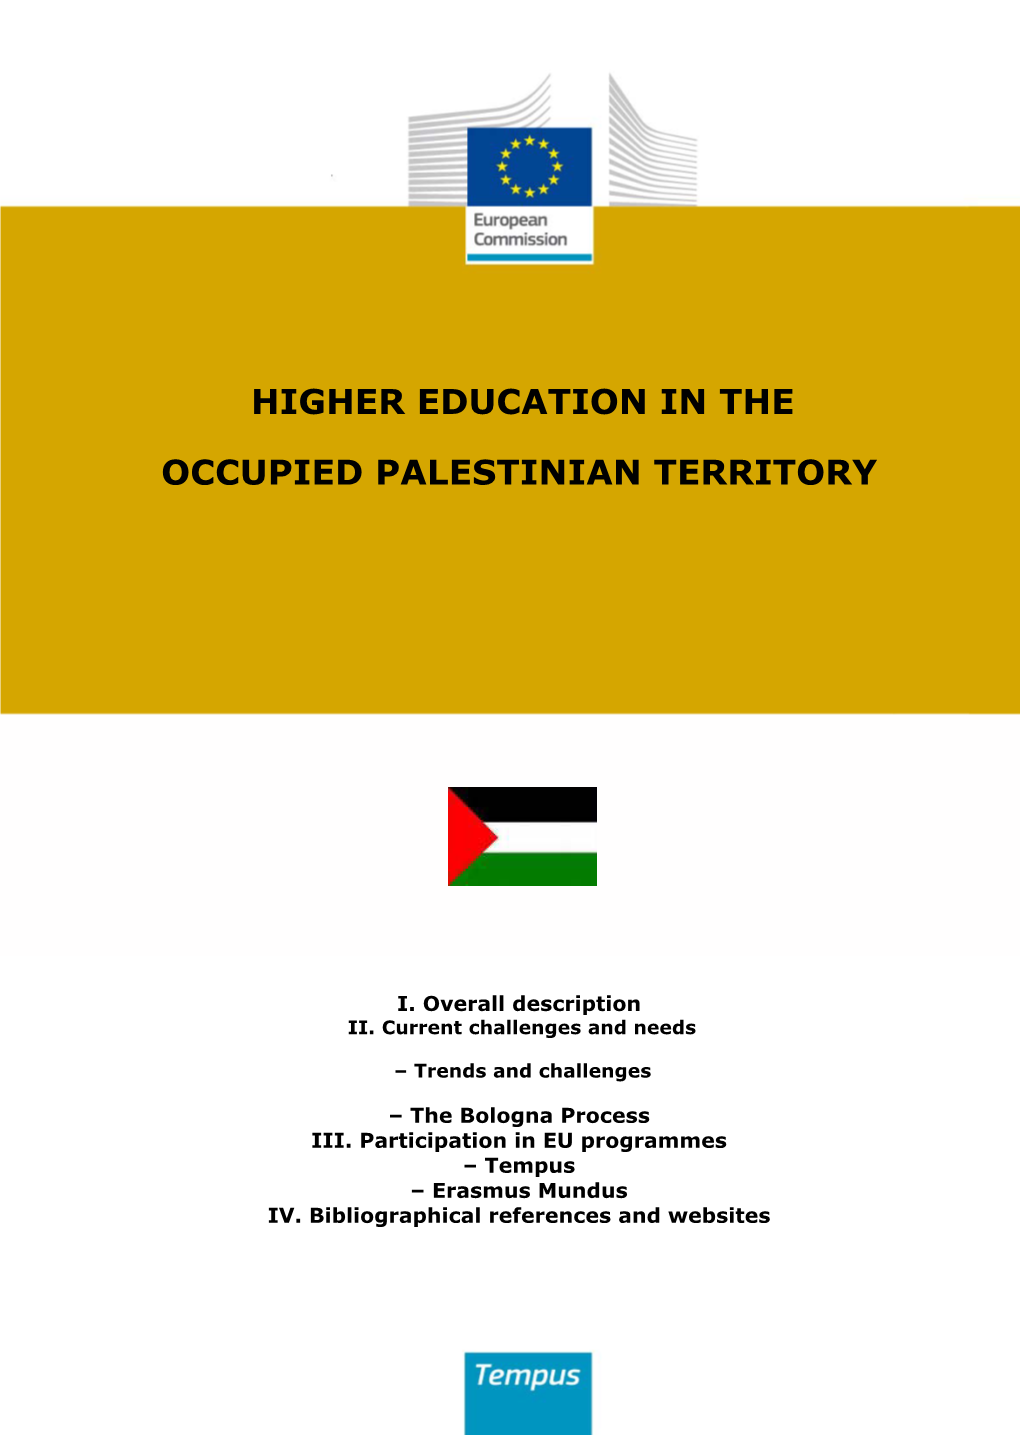 Higher Education in the Occupied Palestinian